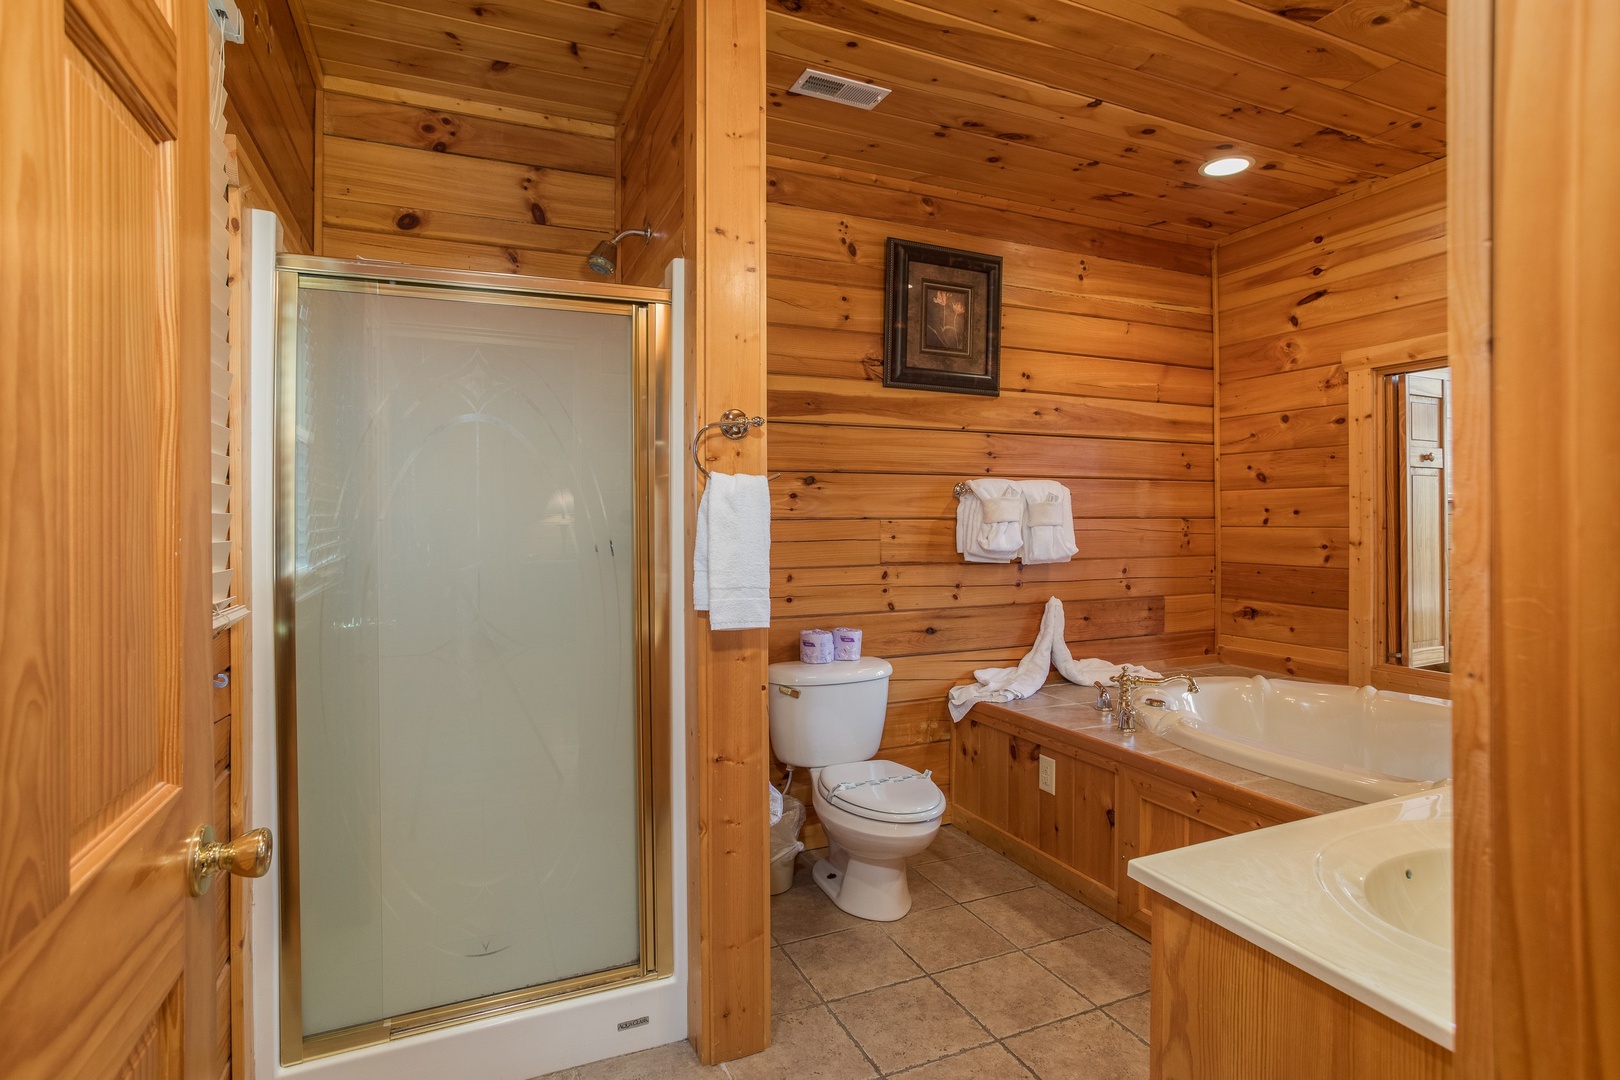 Bathroom with a jacuzzi tub and separate shower at Howlin' in the Smokies, a 2 bedroom cabin rental located in Pigeon Forge